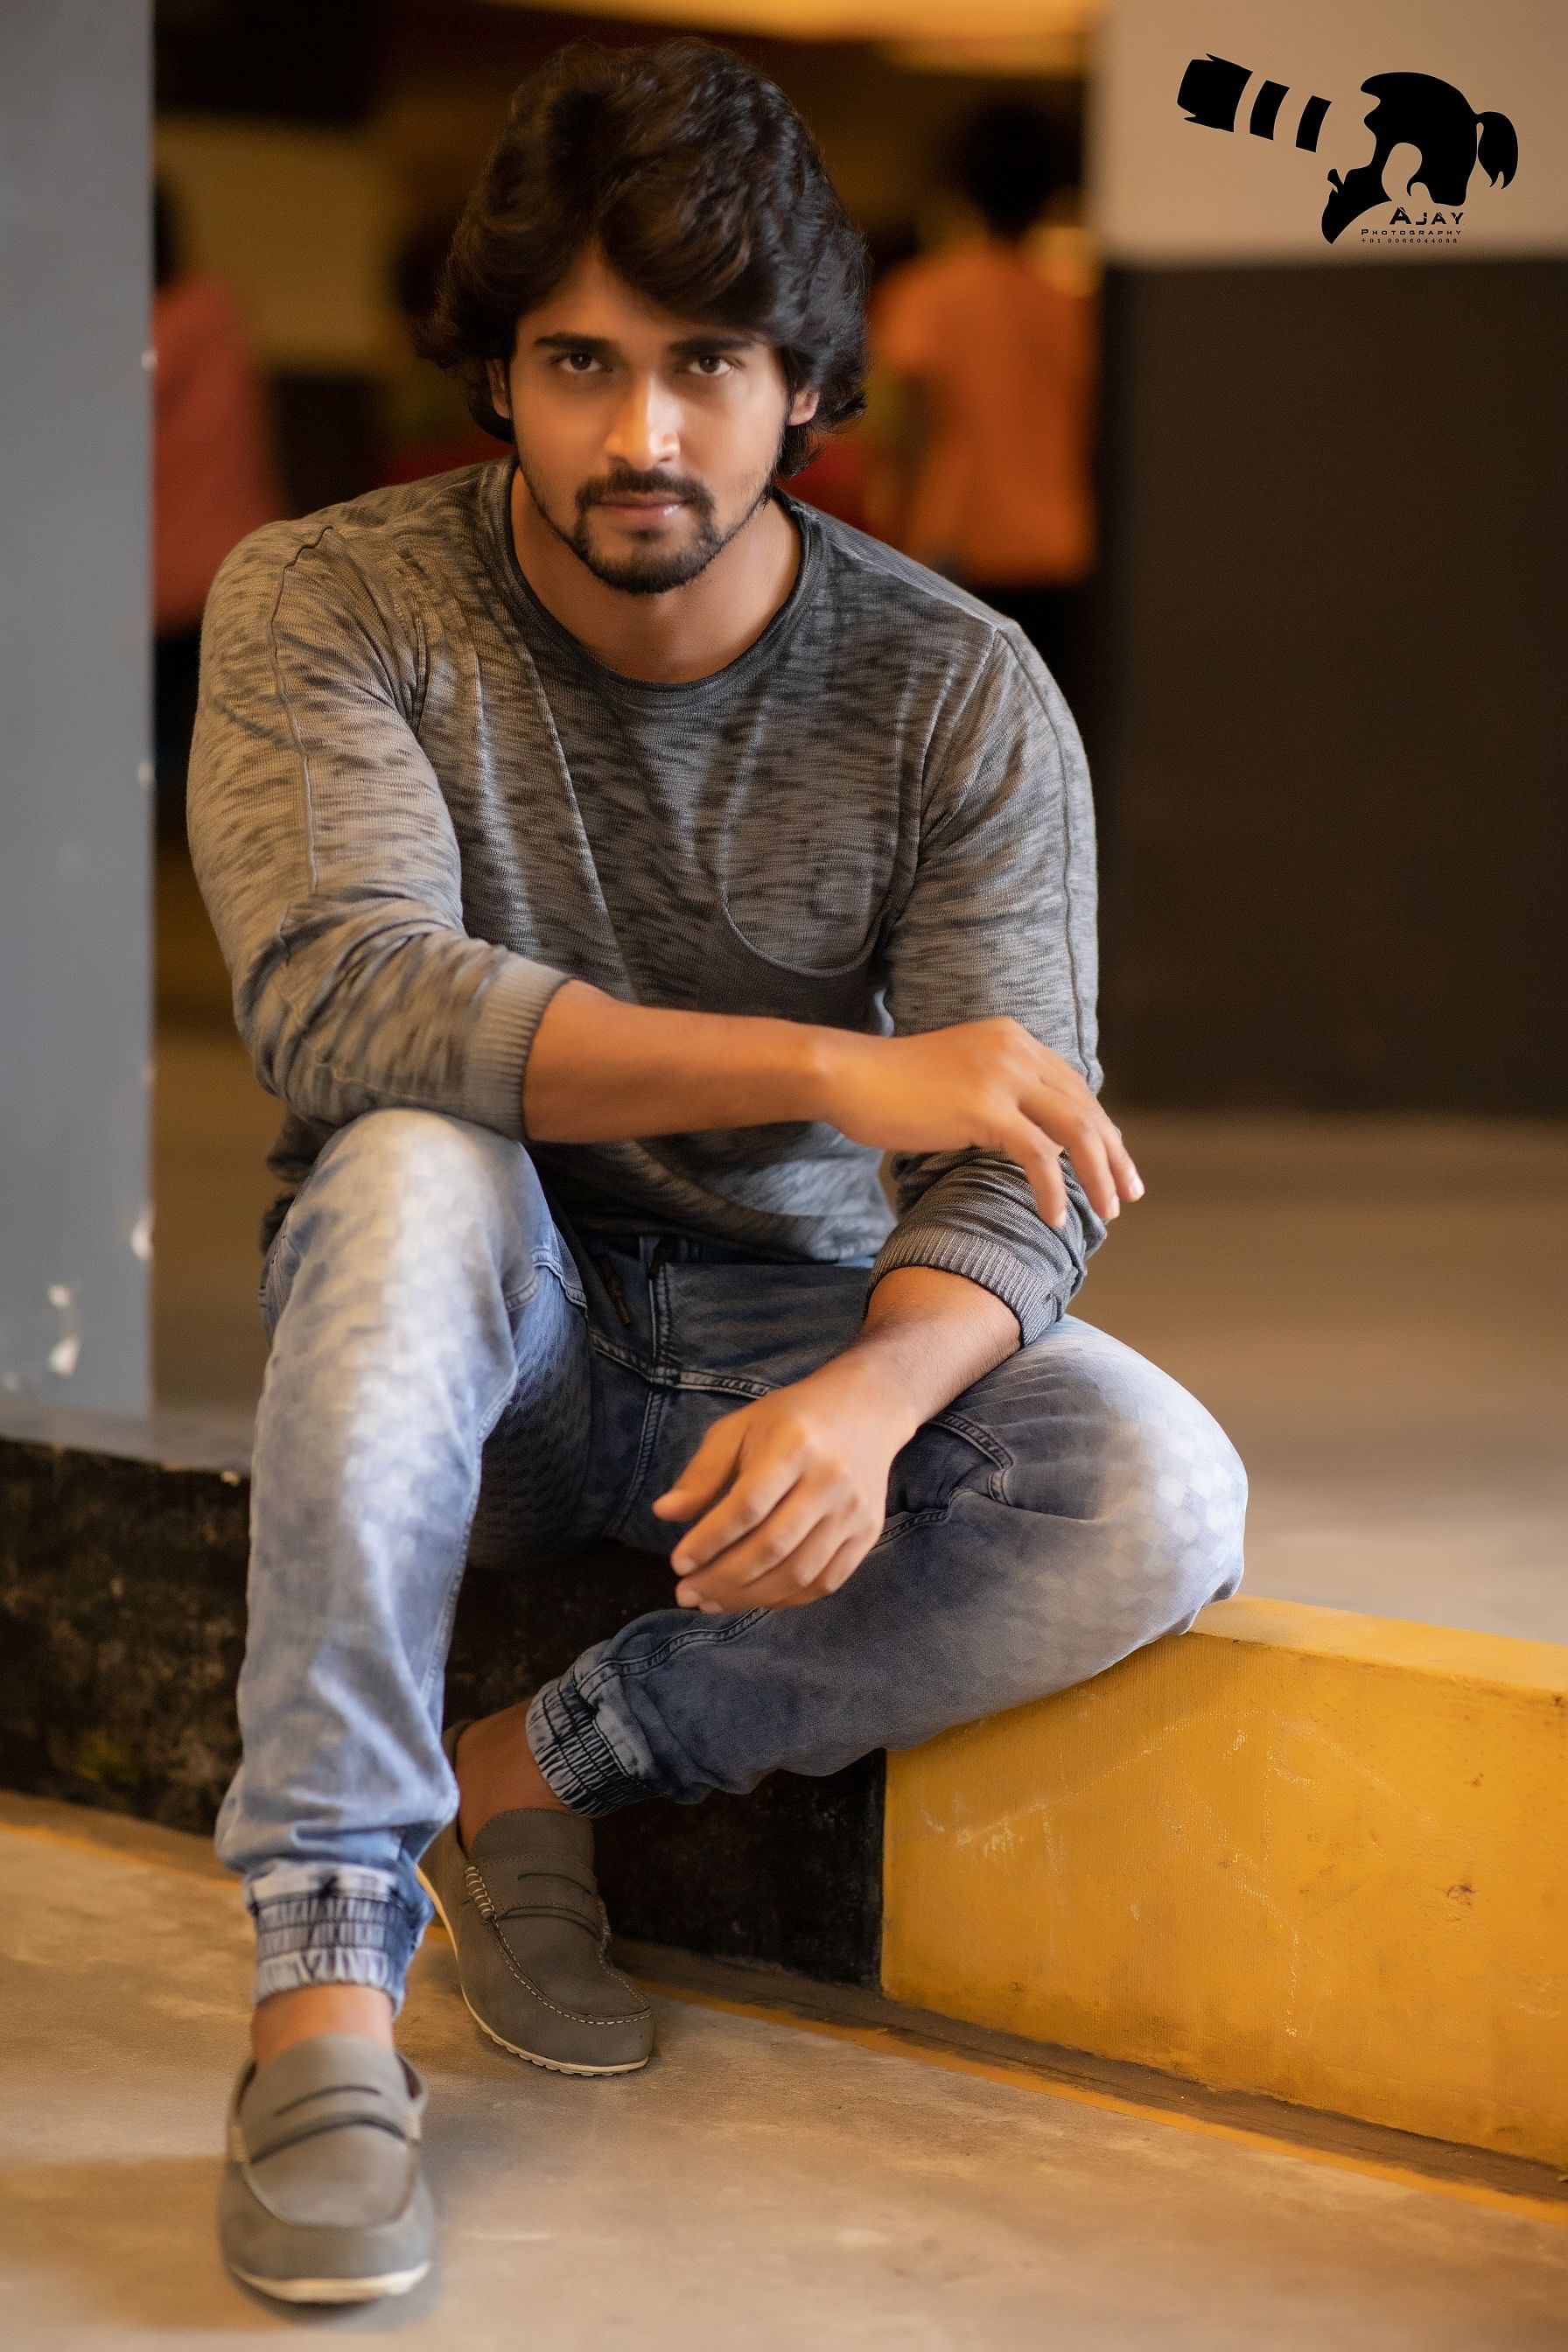 Chandan Kumar made his debut in the television  industry with ‘Pyate Mandi Kadige Bandru’ and  forayed into the big screen with ‘Luv U Alia’. He is now working on the television serial, ‘Sarva Mangala Mangalye’ and has two films up his sleeve.